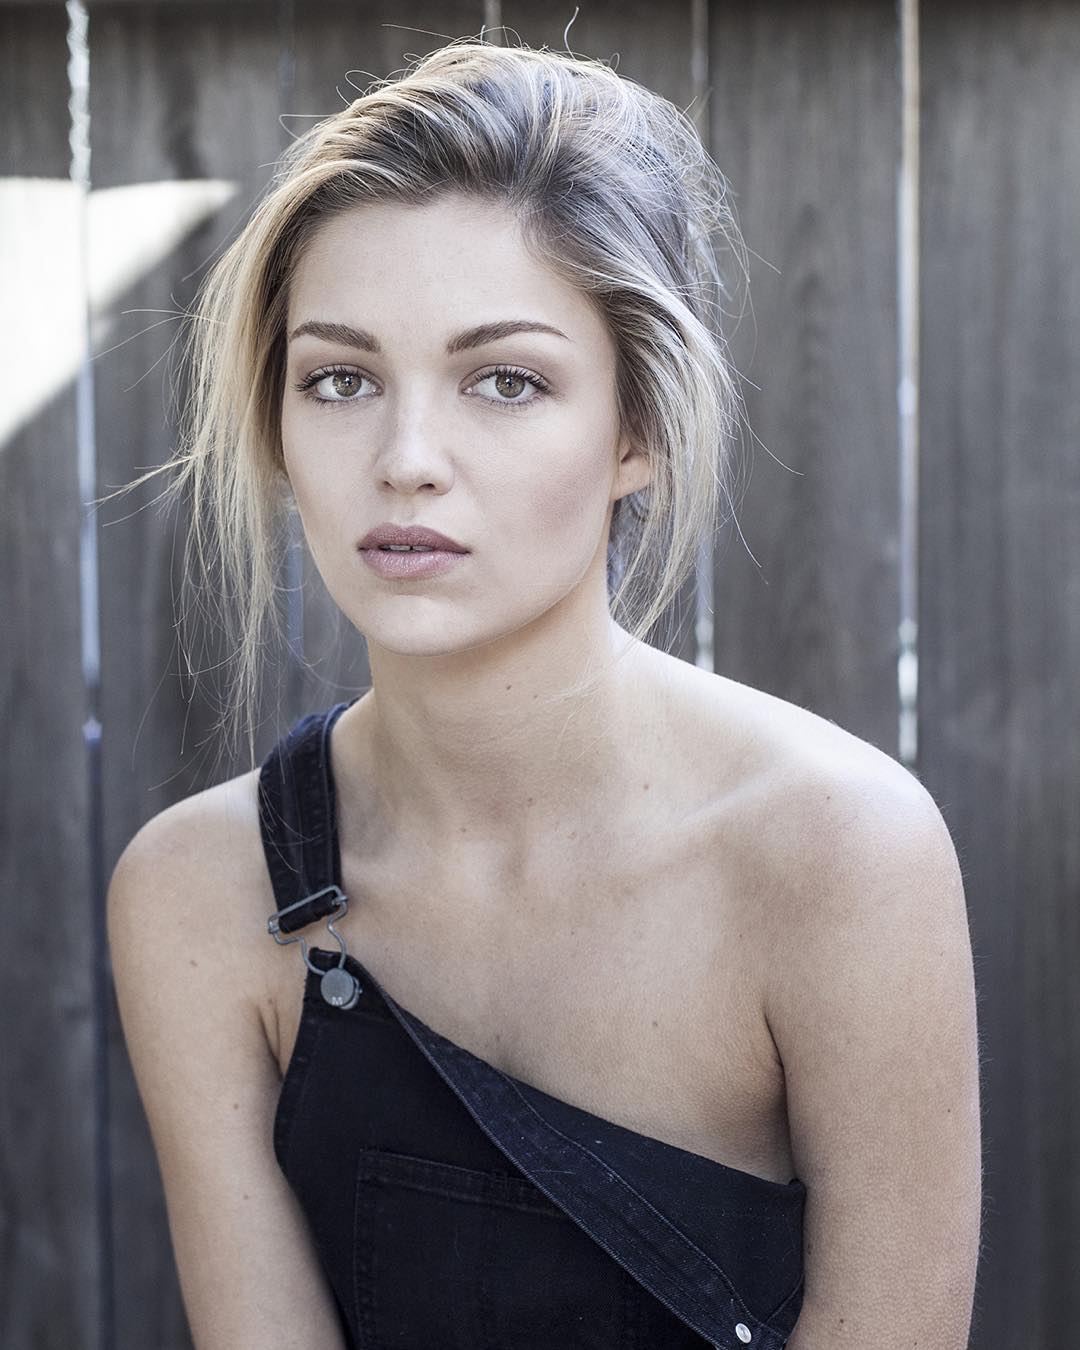 Abe's Words: Lili Simmons - Abe's Words Beauty Of The Month - November 20161080 x 1350